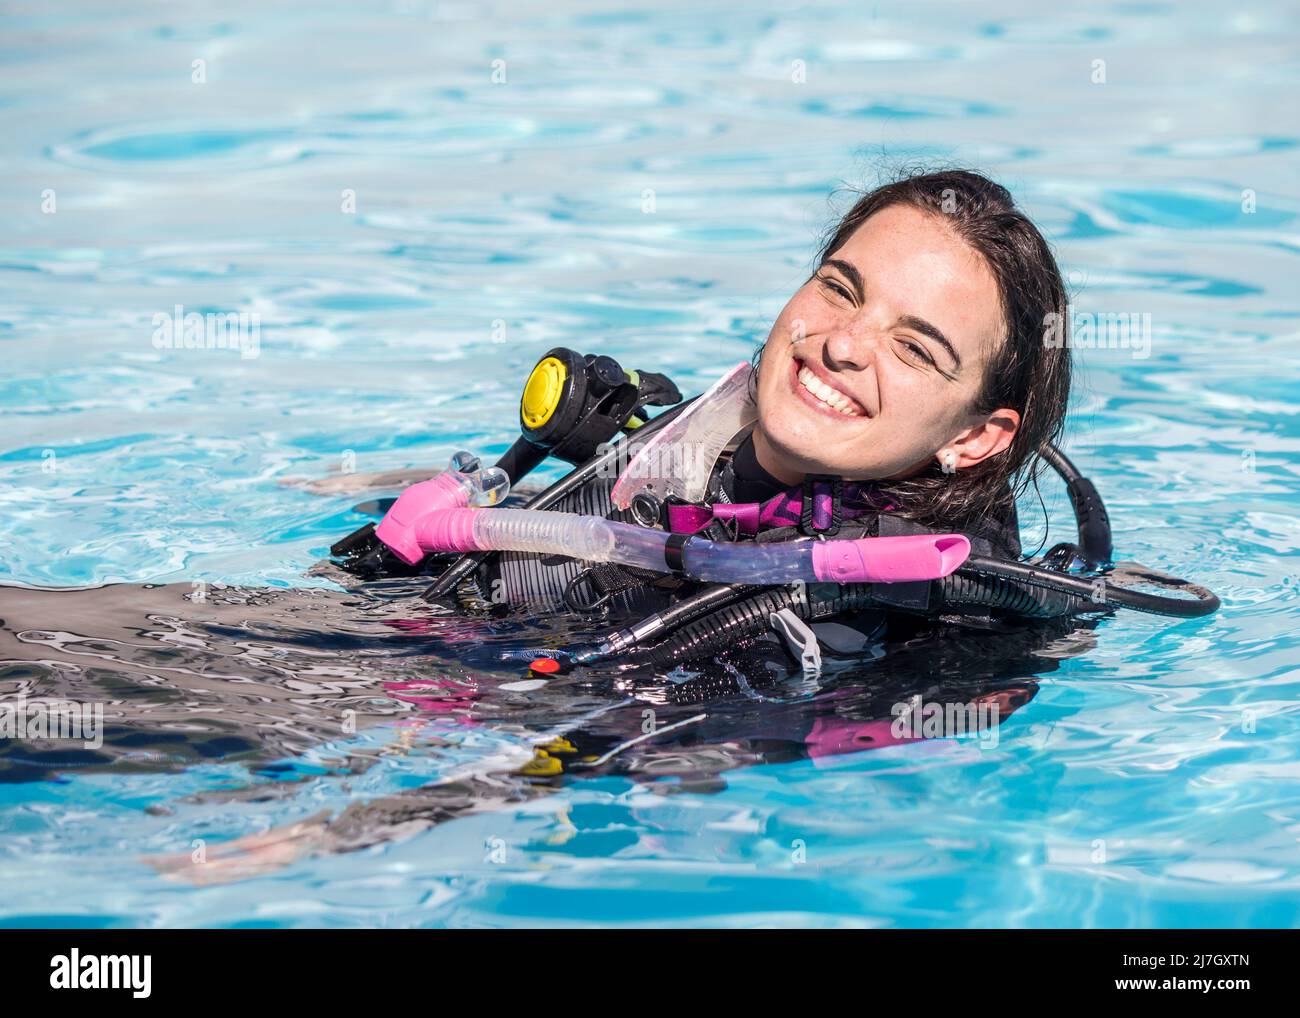 Young woman with scuba gear on in a pool smiling at the camera Stock Photo